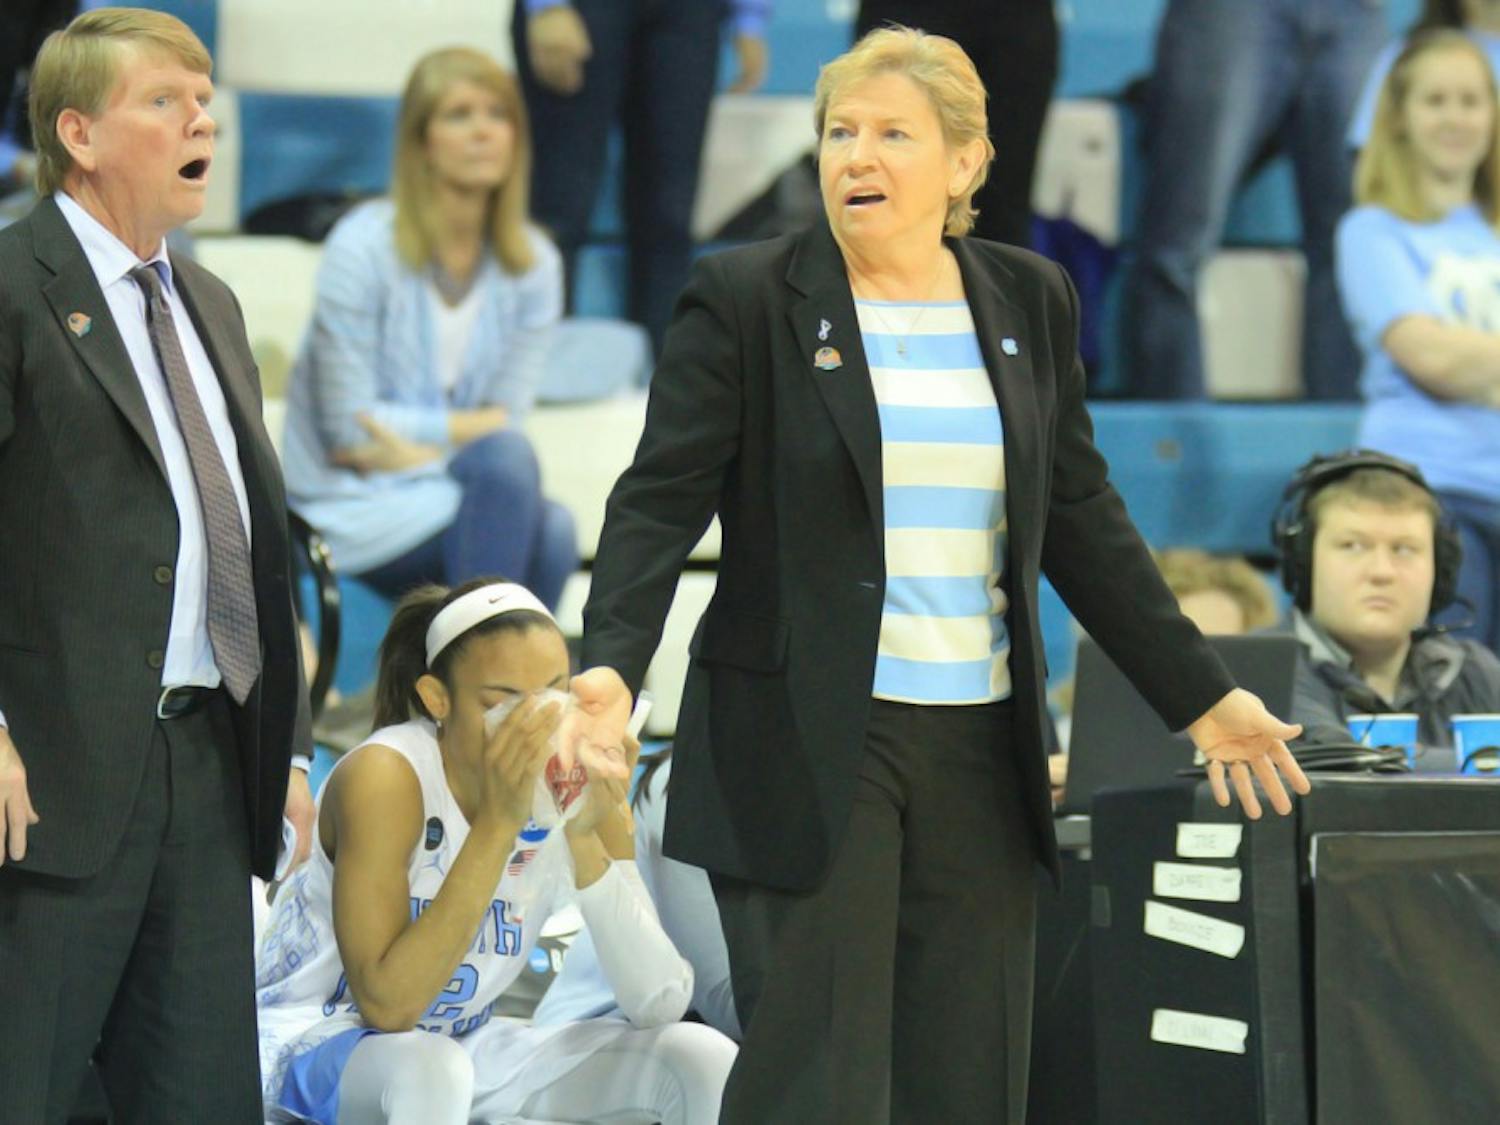 North Carolina coaches Andrew Calder (left) and Sylvia Hatchell react to a call during Saturday afternoon's game against Liberty. The Tar Heel won 71-65.